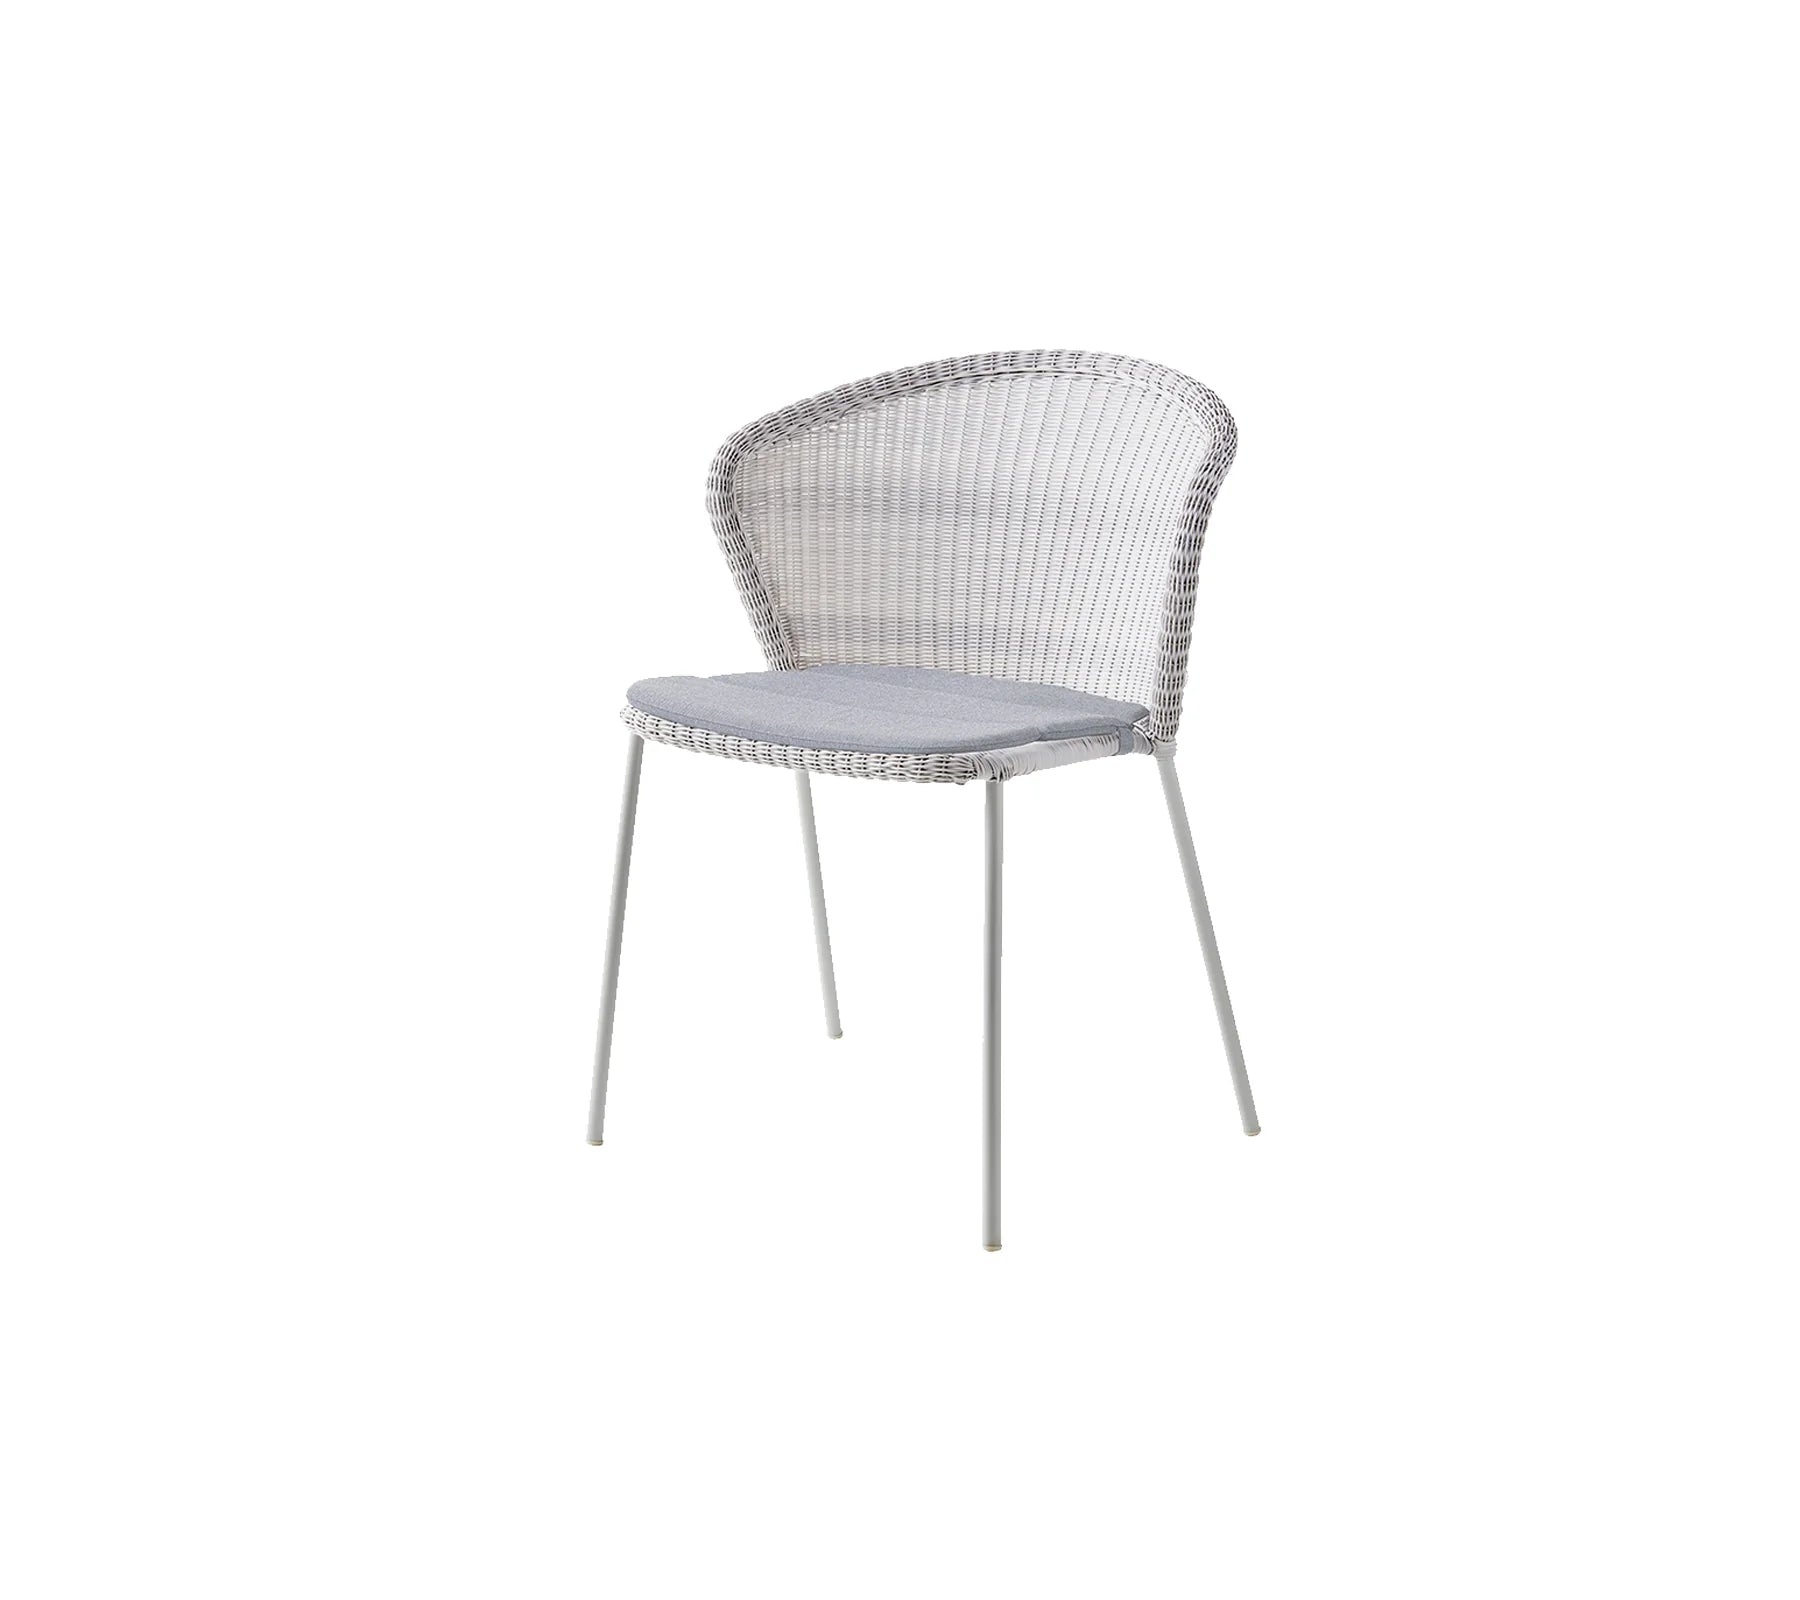 Boxhill's Lean Stackable Outdoor Garden Chair White Grey Weave with cushion